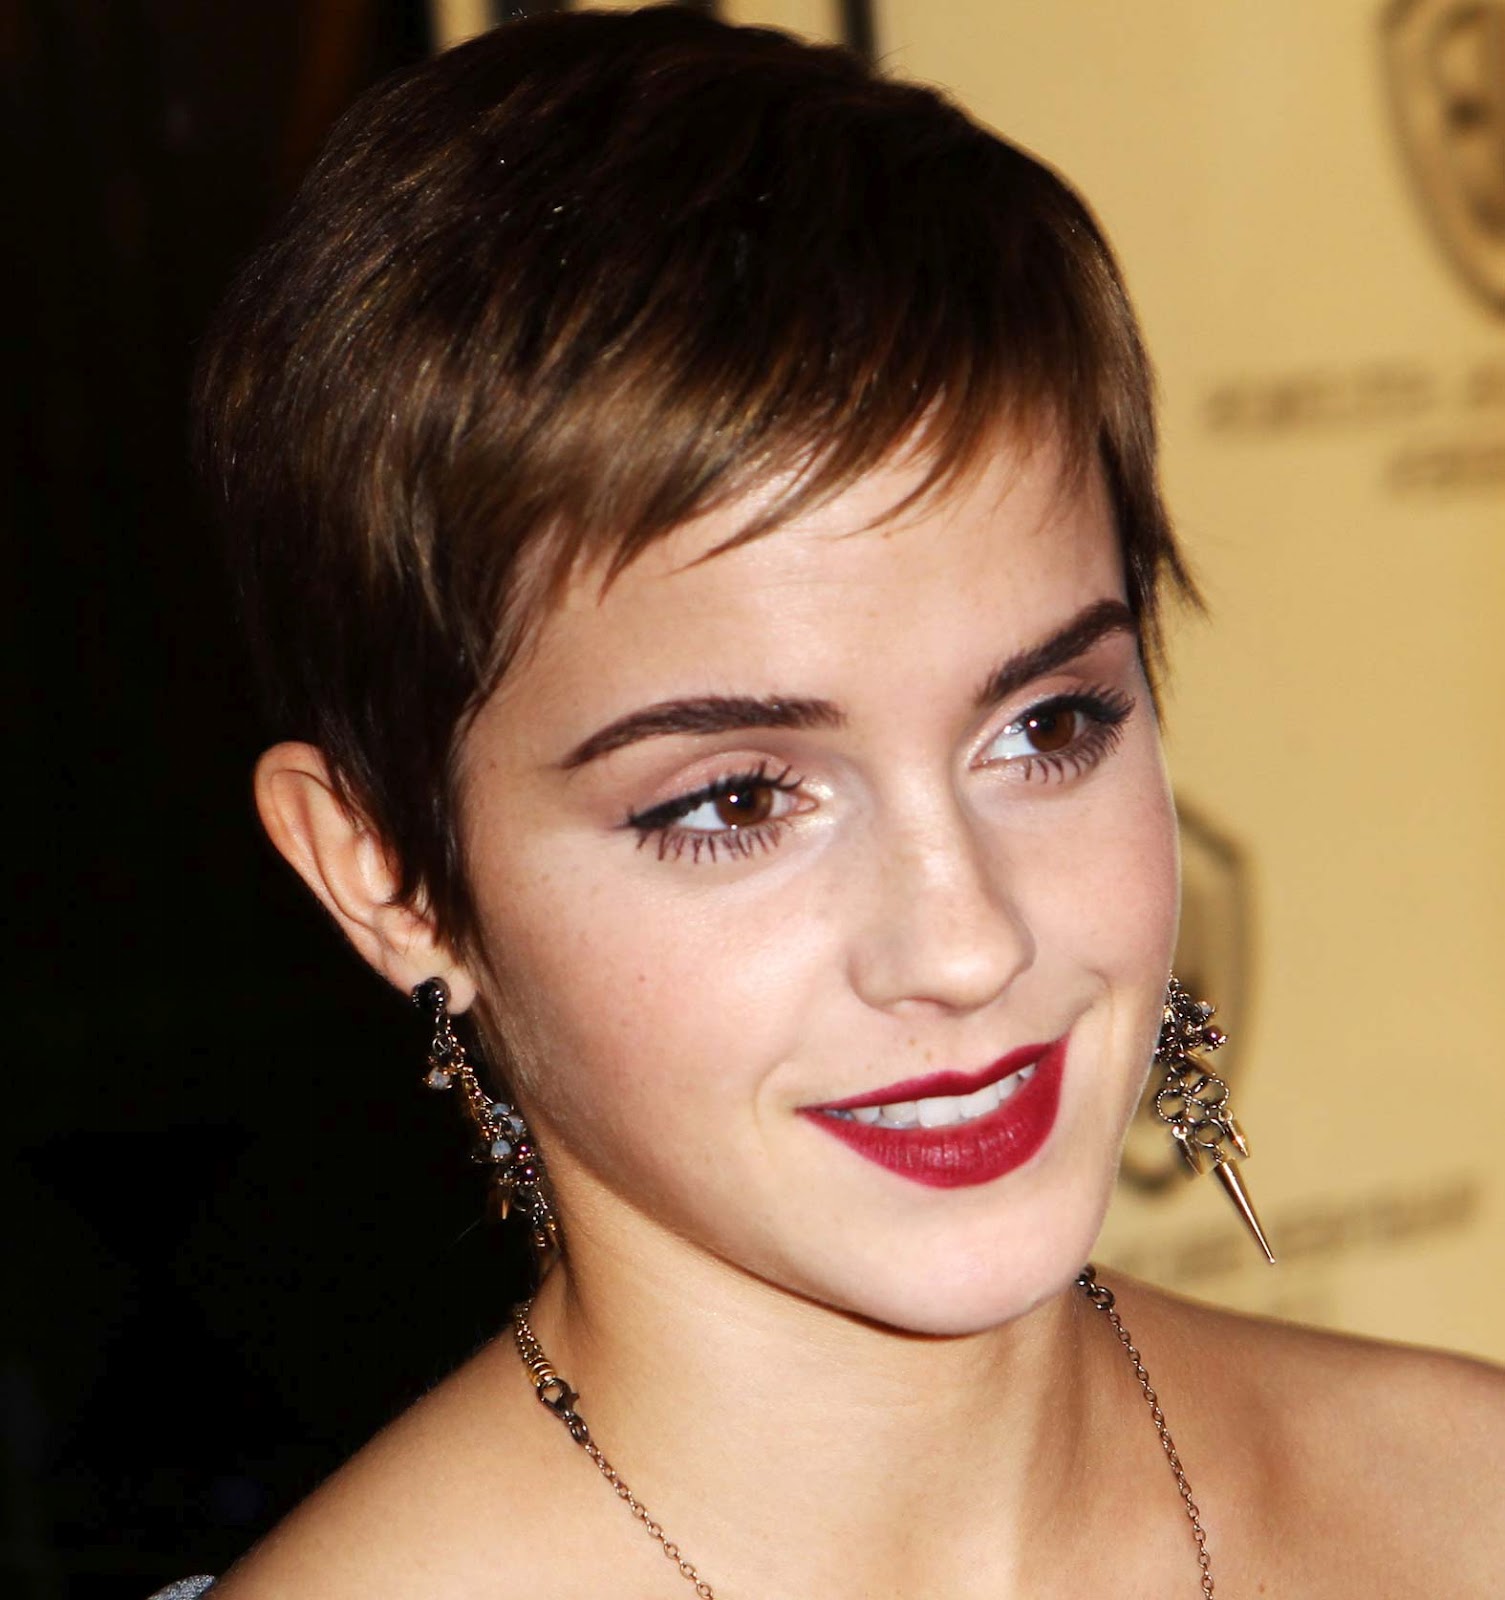 This harsh pixie cut is descended from a long line of short cuts for ...